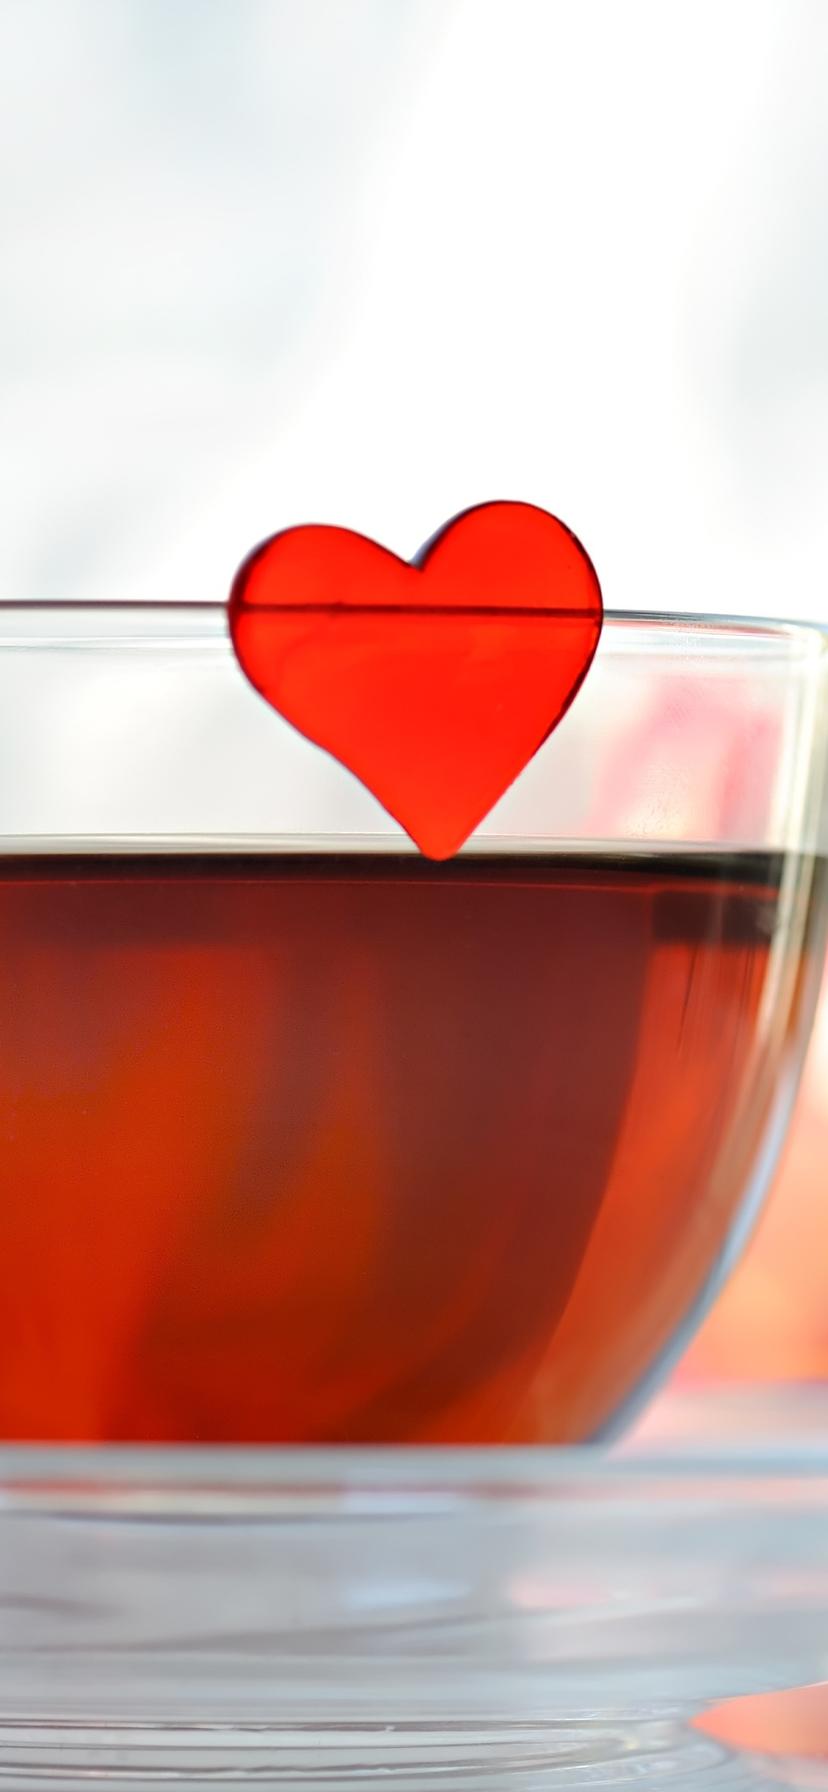 Red heart in a cup of sweet tea - Love mornings